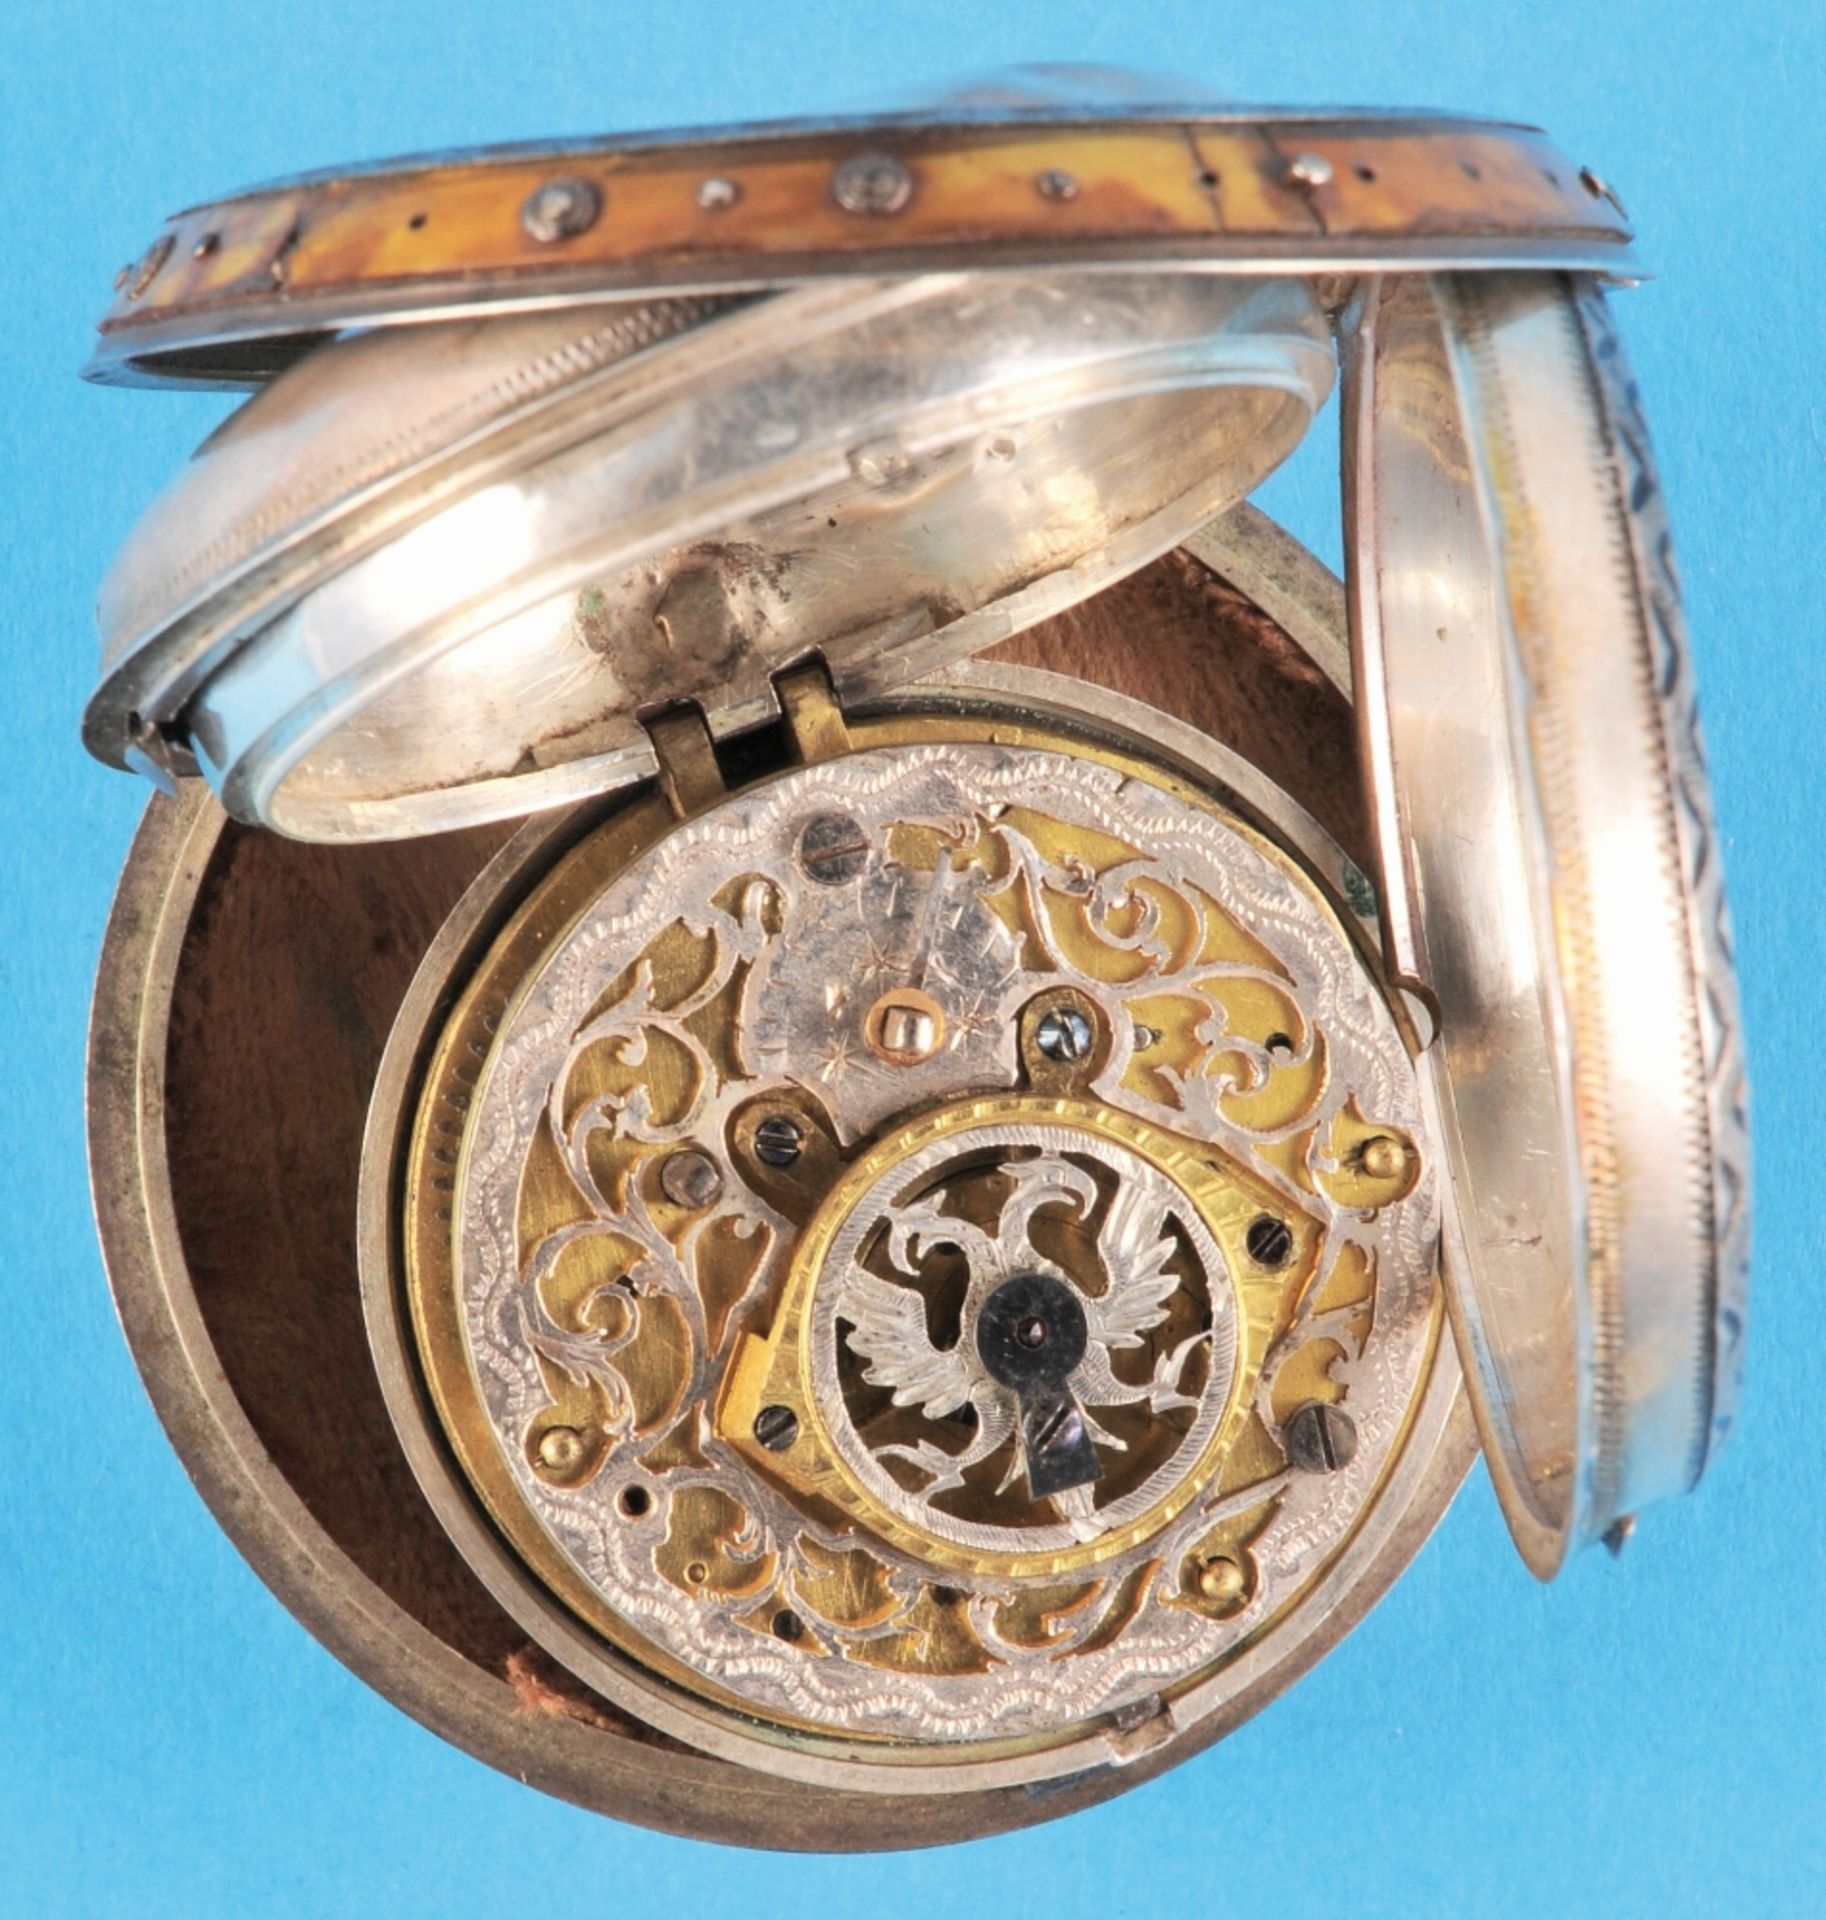 Silver verge pocket watch in a triple case, outer case decorated with painted tortoiseshell, smooth